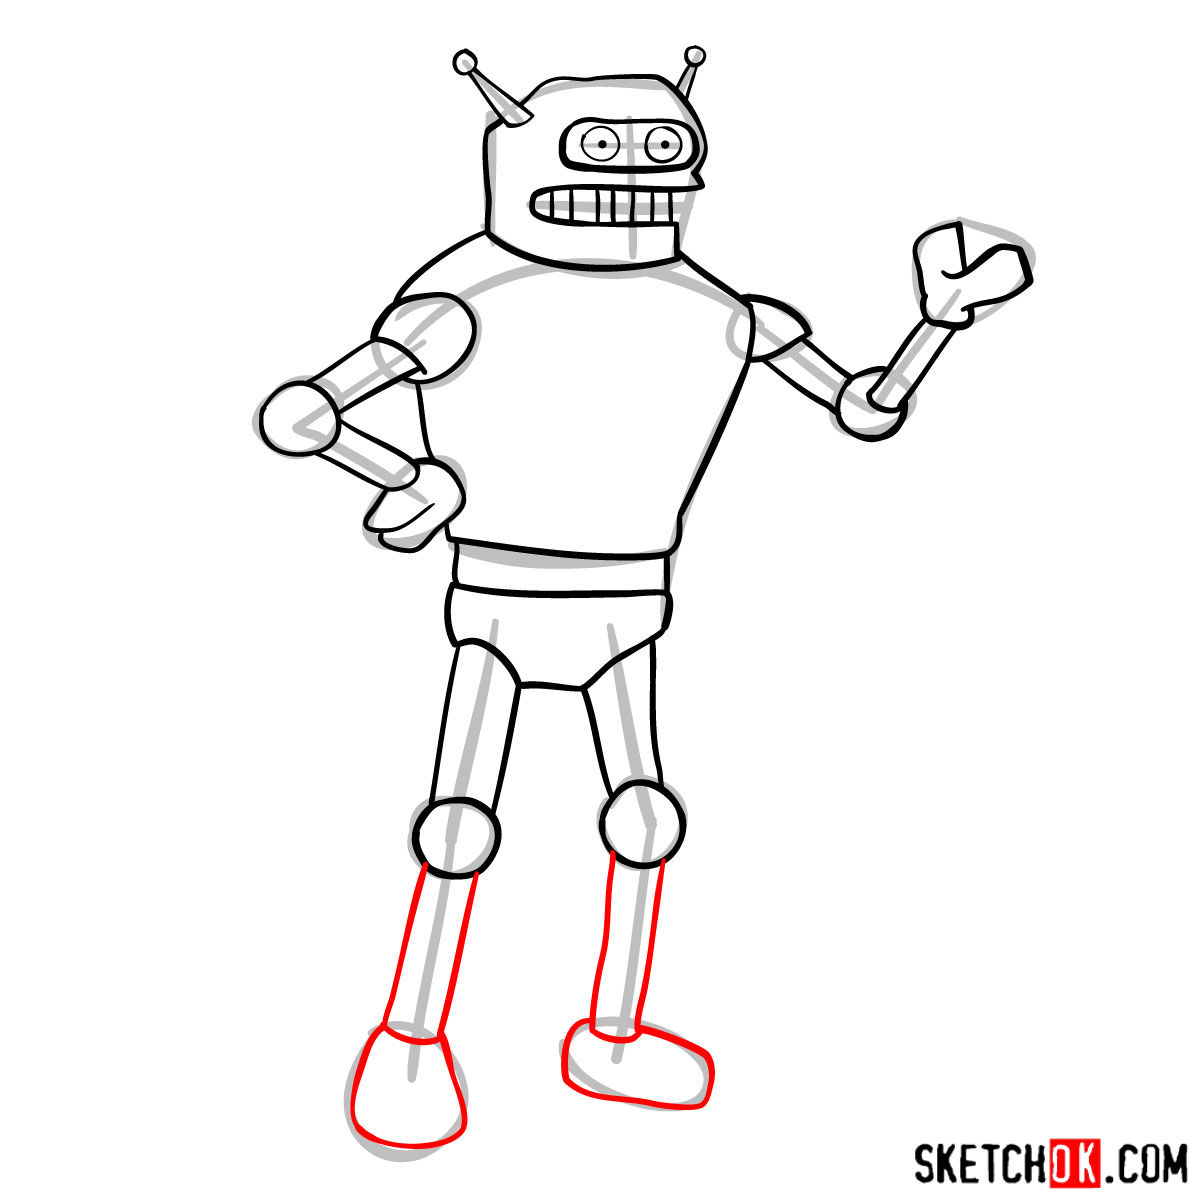 How to draw Calculon from Futurama - step 10